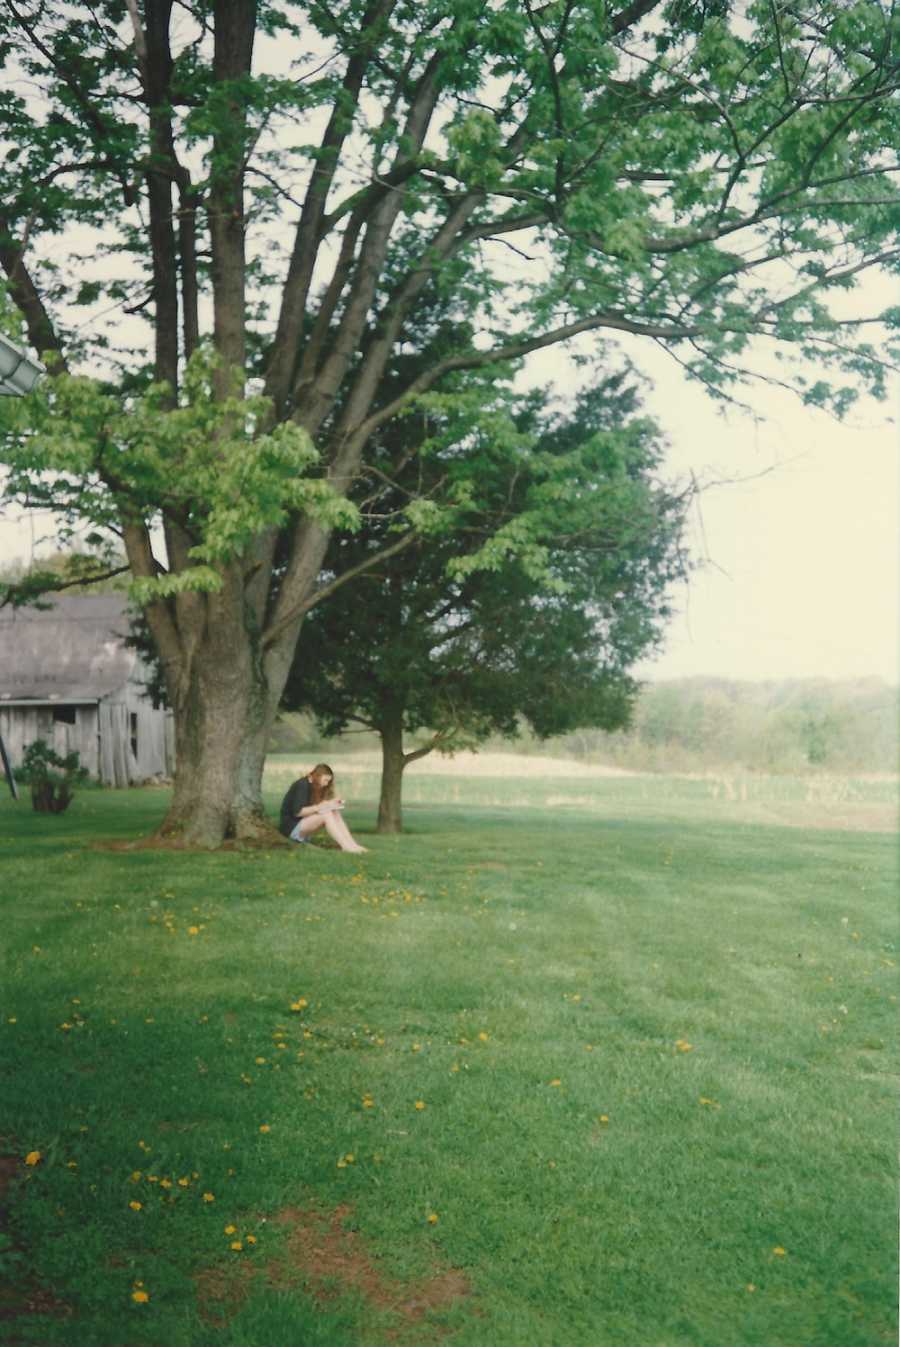 Woman who has experienced a lot of loss in her life sits out side leaning against tree